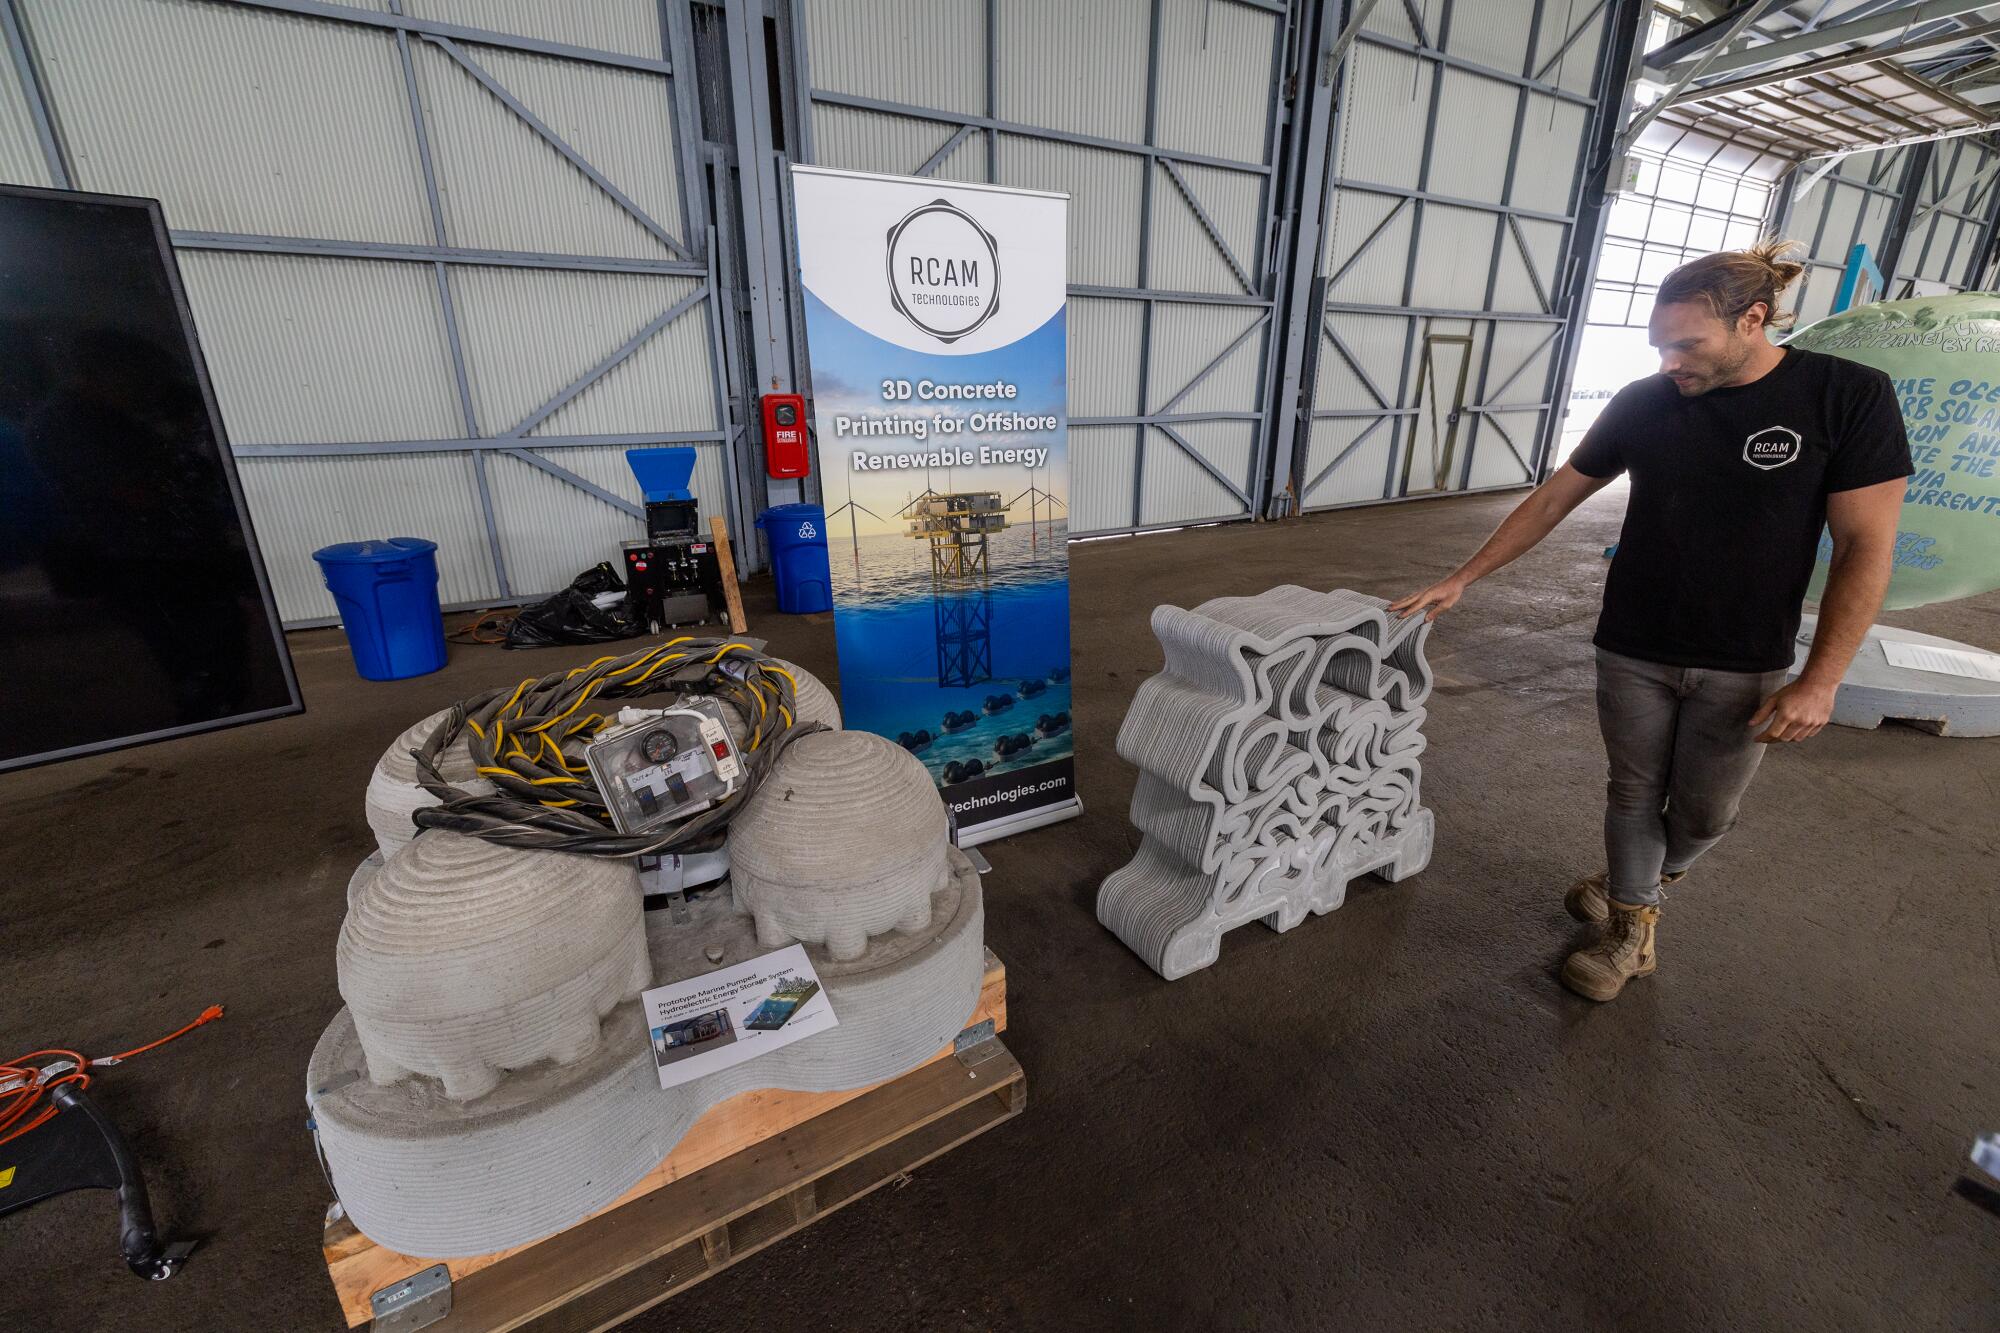 Taylor Marchment shows off 3D concrete printing for marine renewable energy 